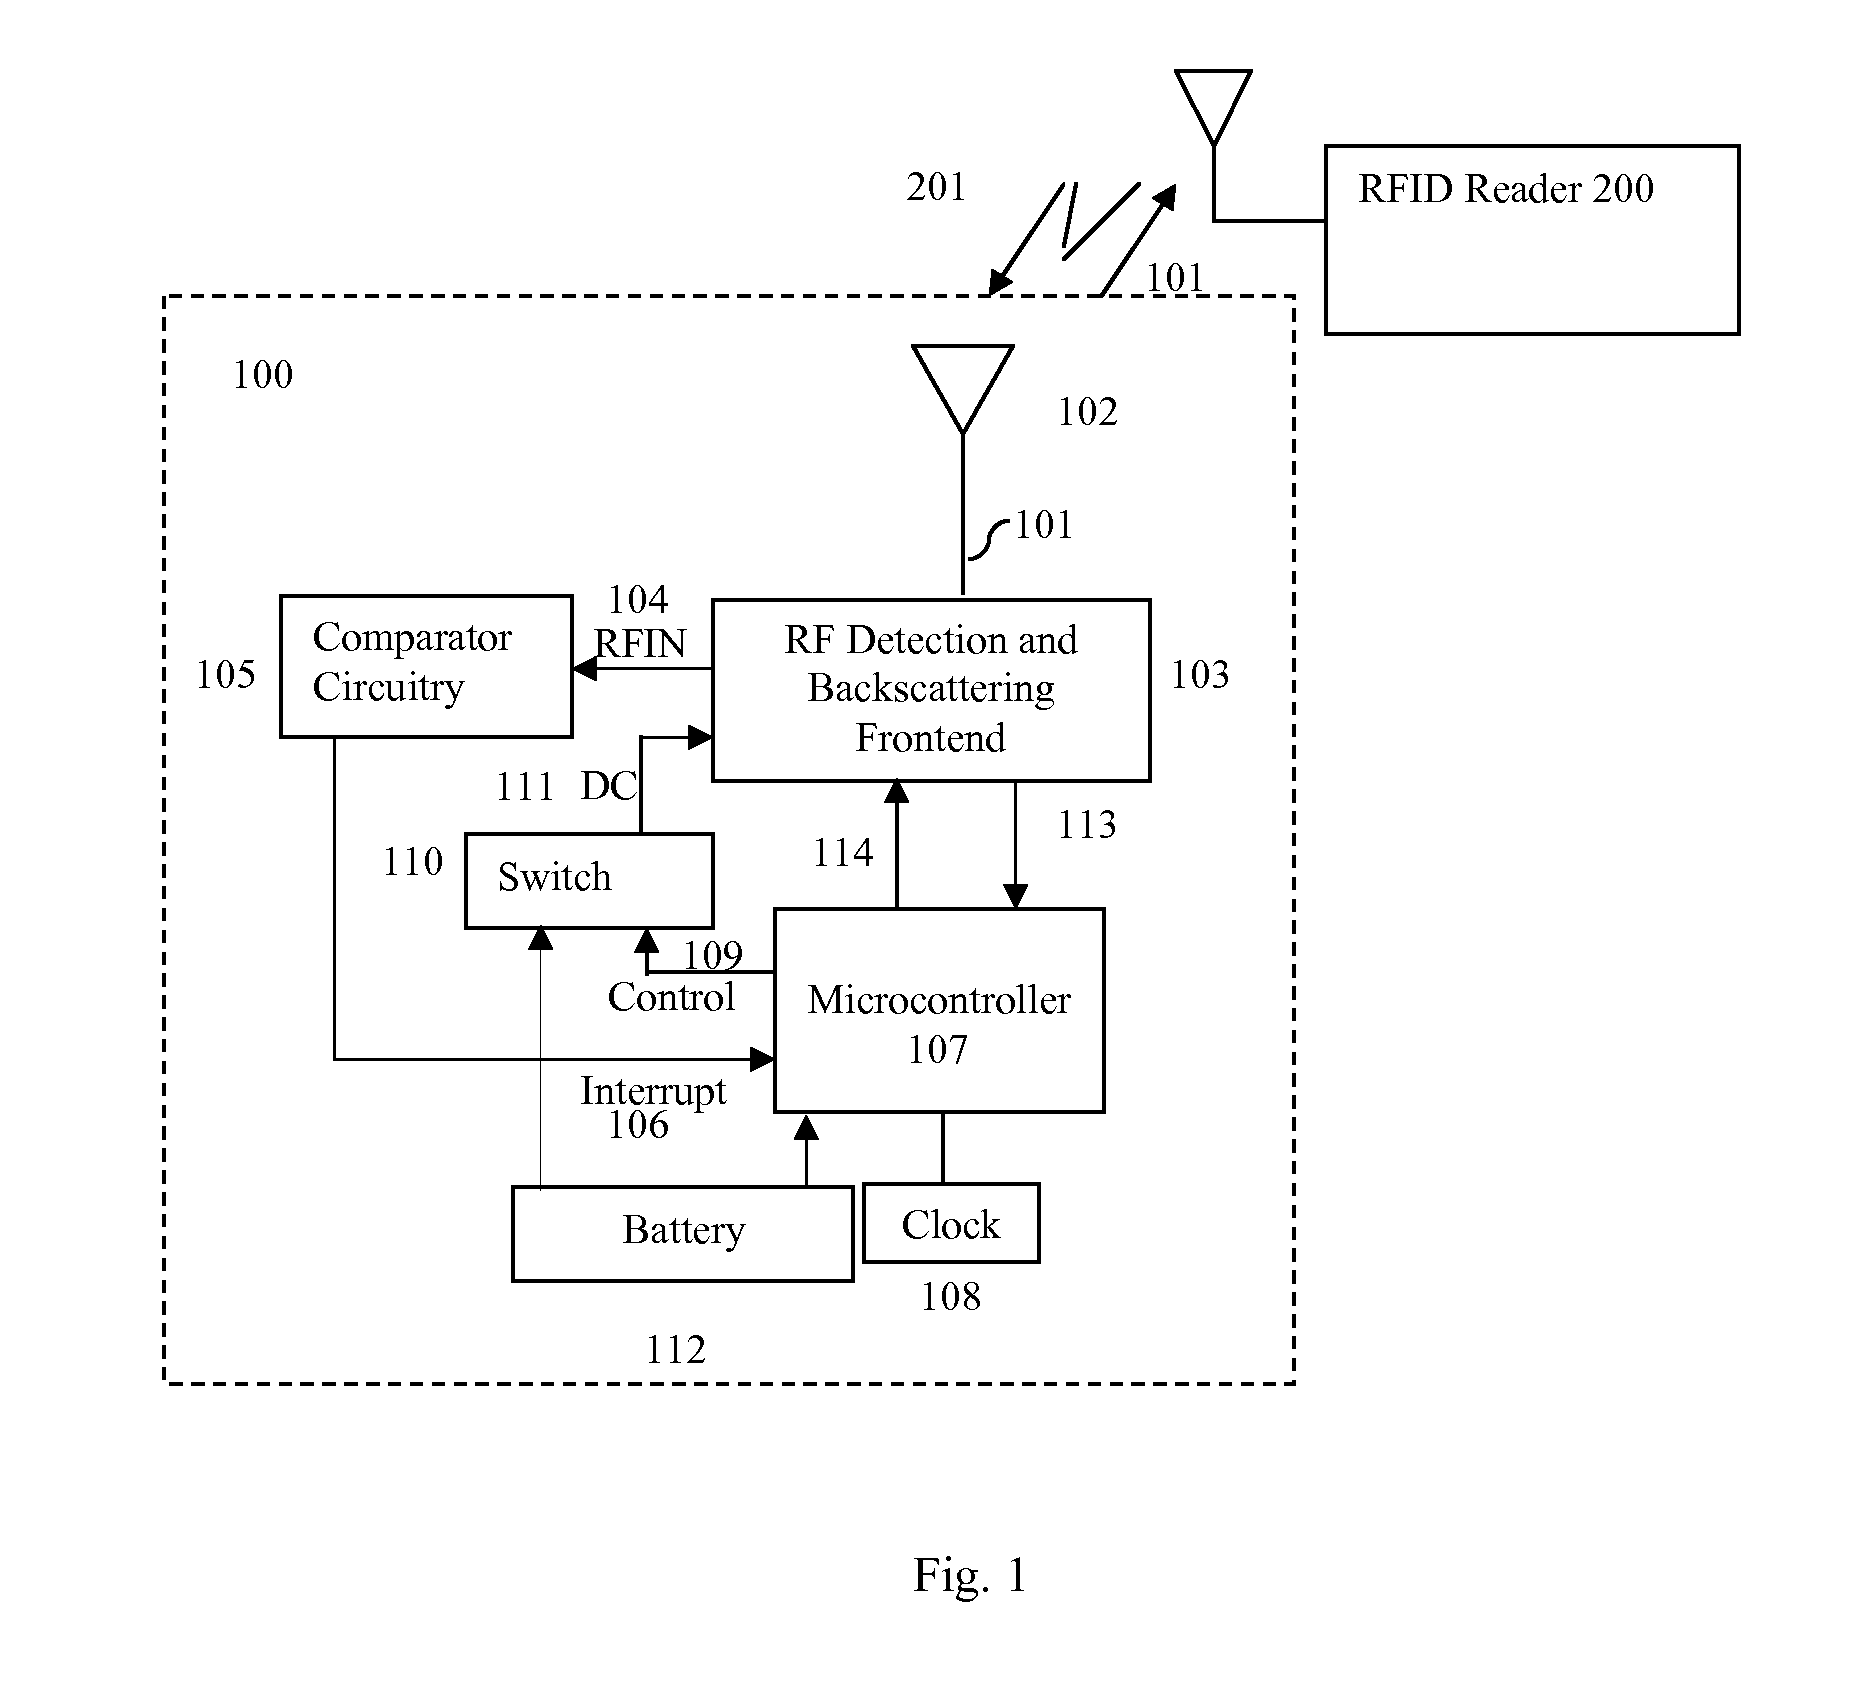 Method and system for low cost, power efficient, wireless transponder devices with enhanced functionality